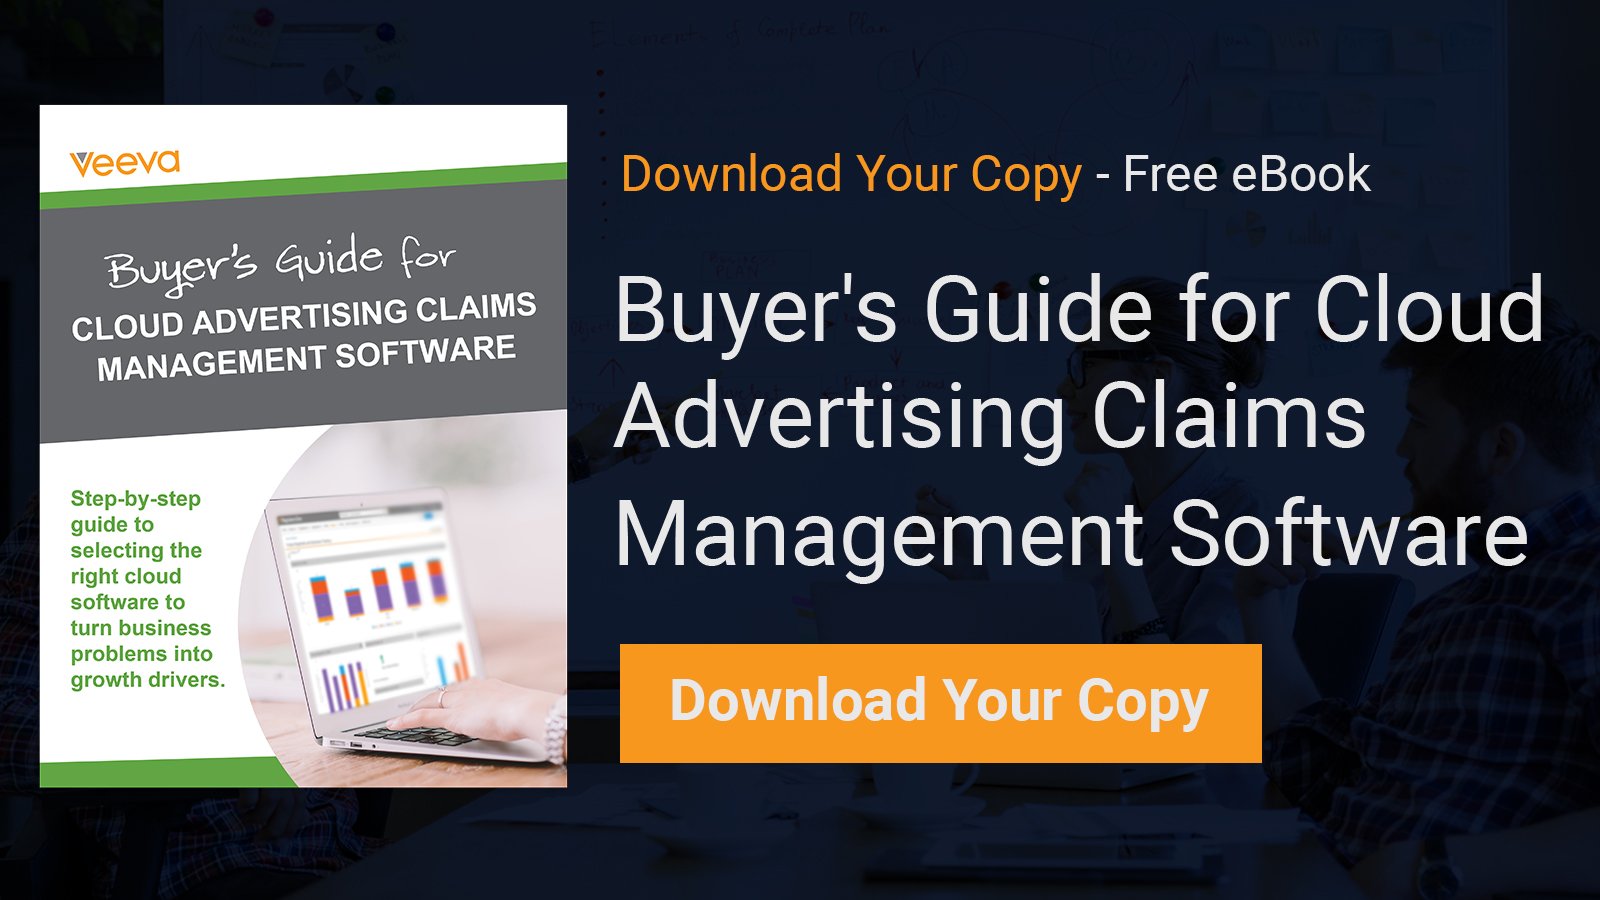 Buyer's Guide for Cloud Advertising Claims Management Software